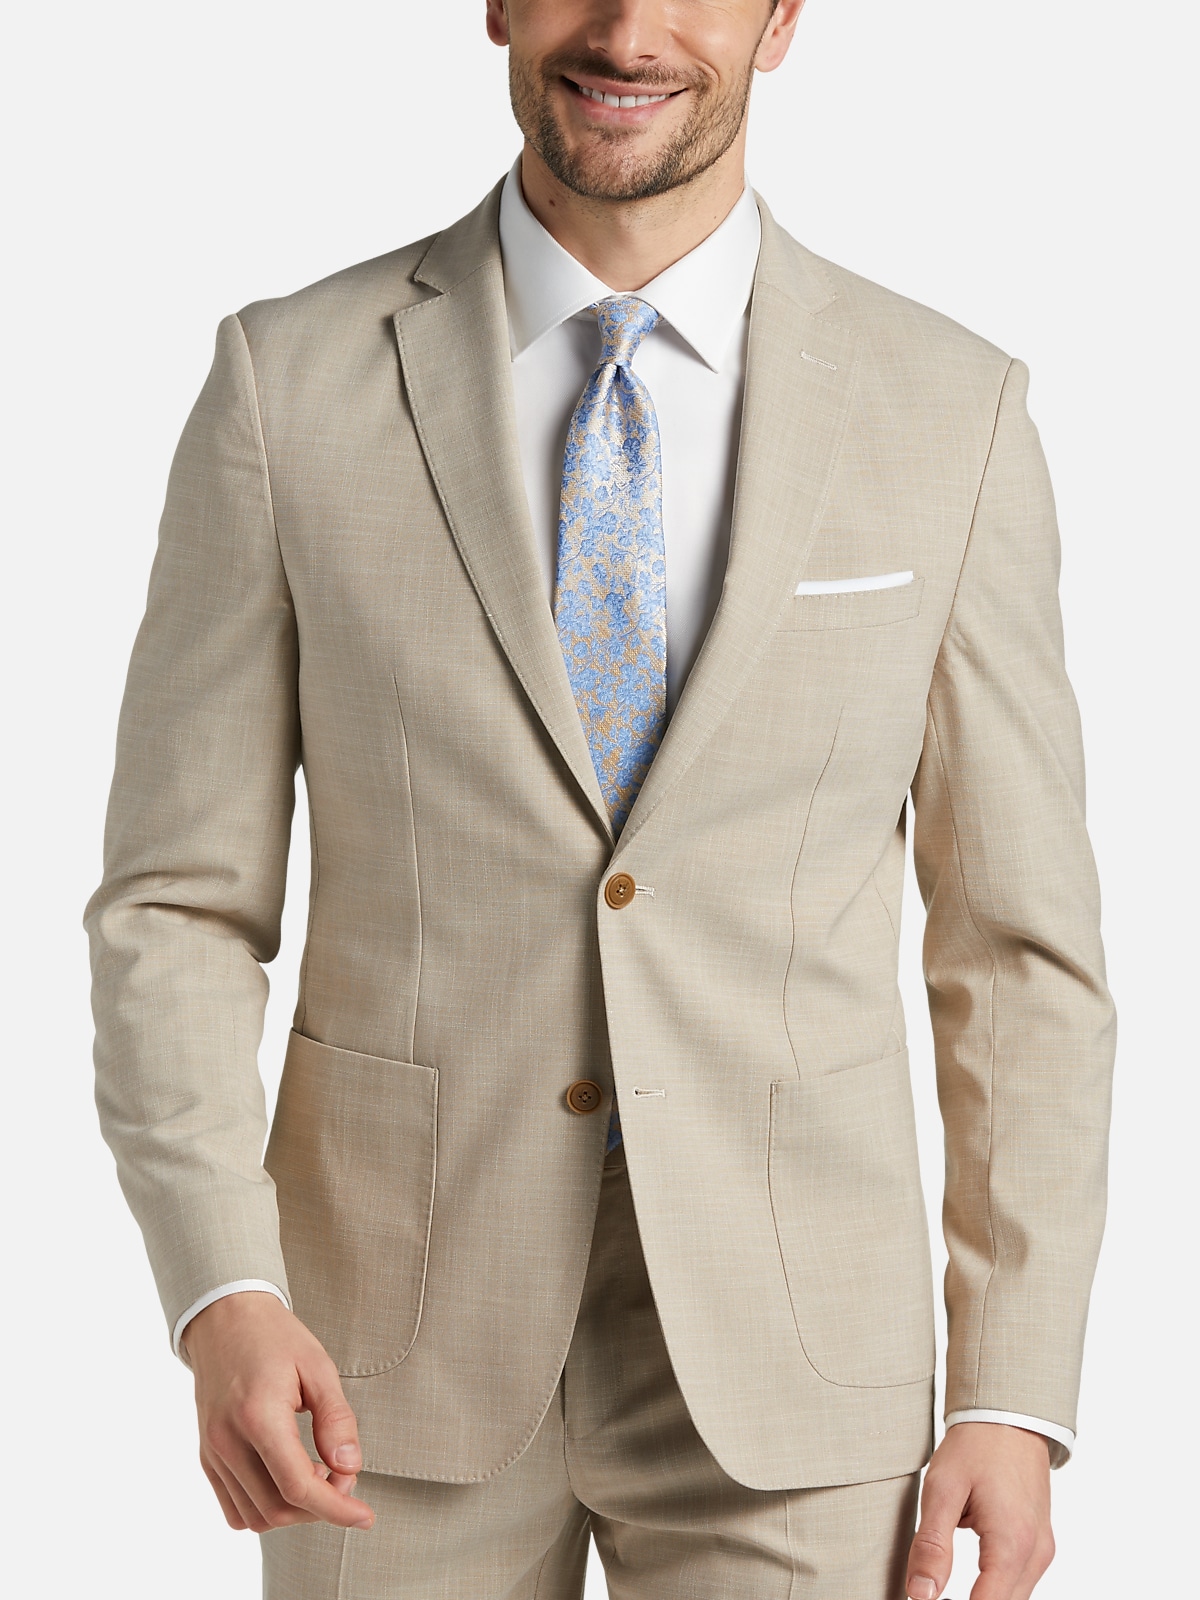 Michael Kors Modern Fit Suit Separates Jacket | All Clearance $39.99 ...